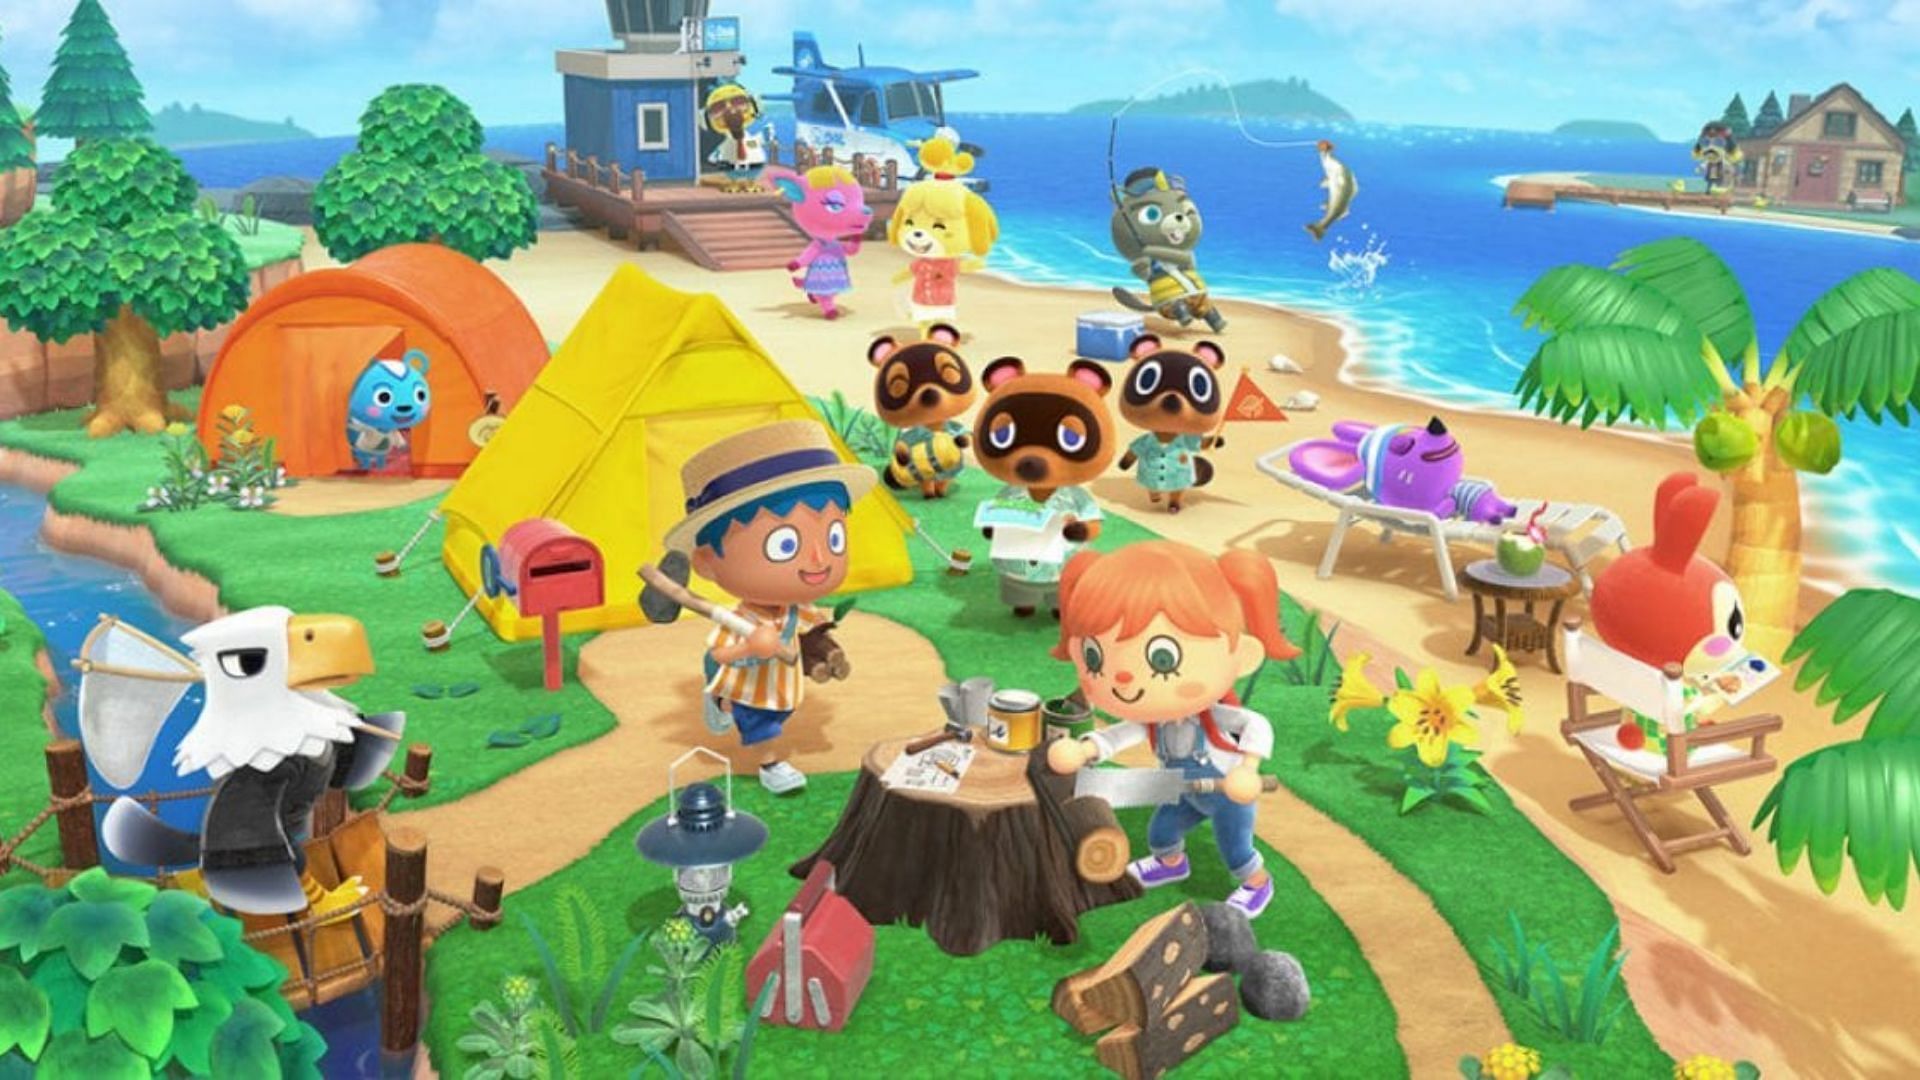 A crowded island can ruin the visual appeal of Animal Crossing: New Horizons (Image via Twinfinite)